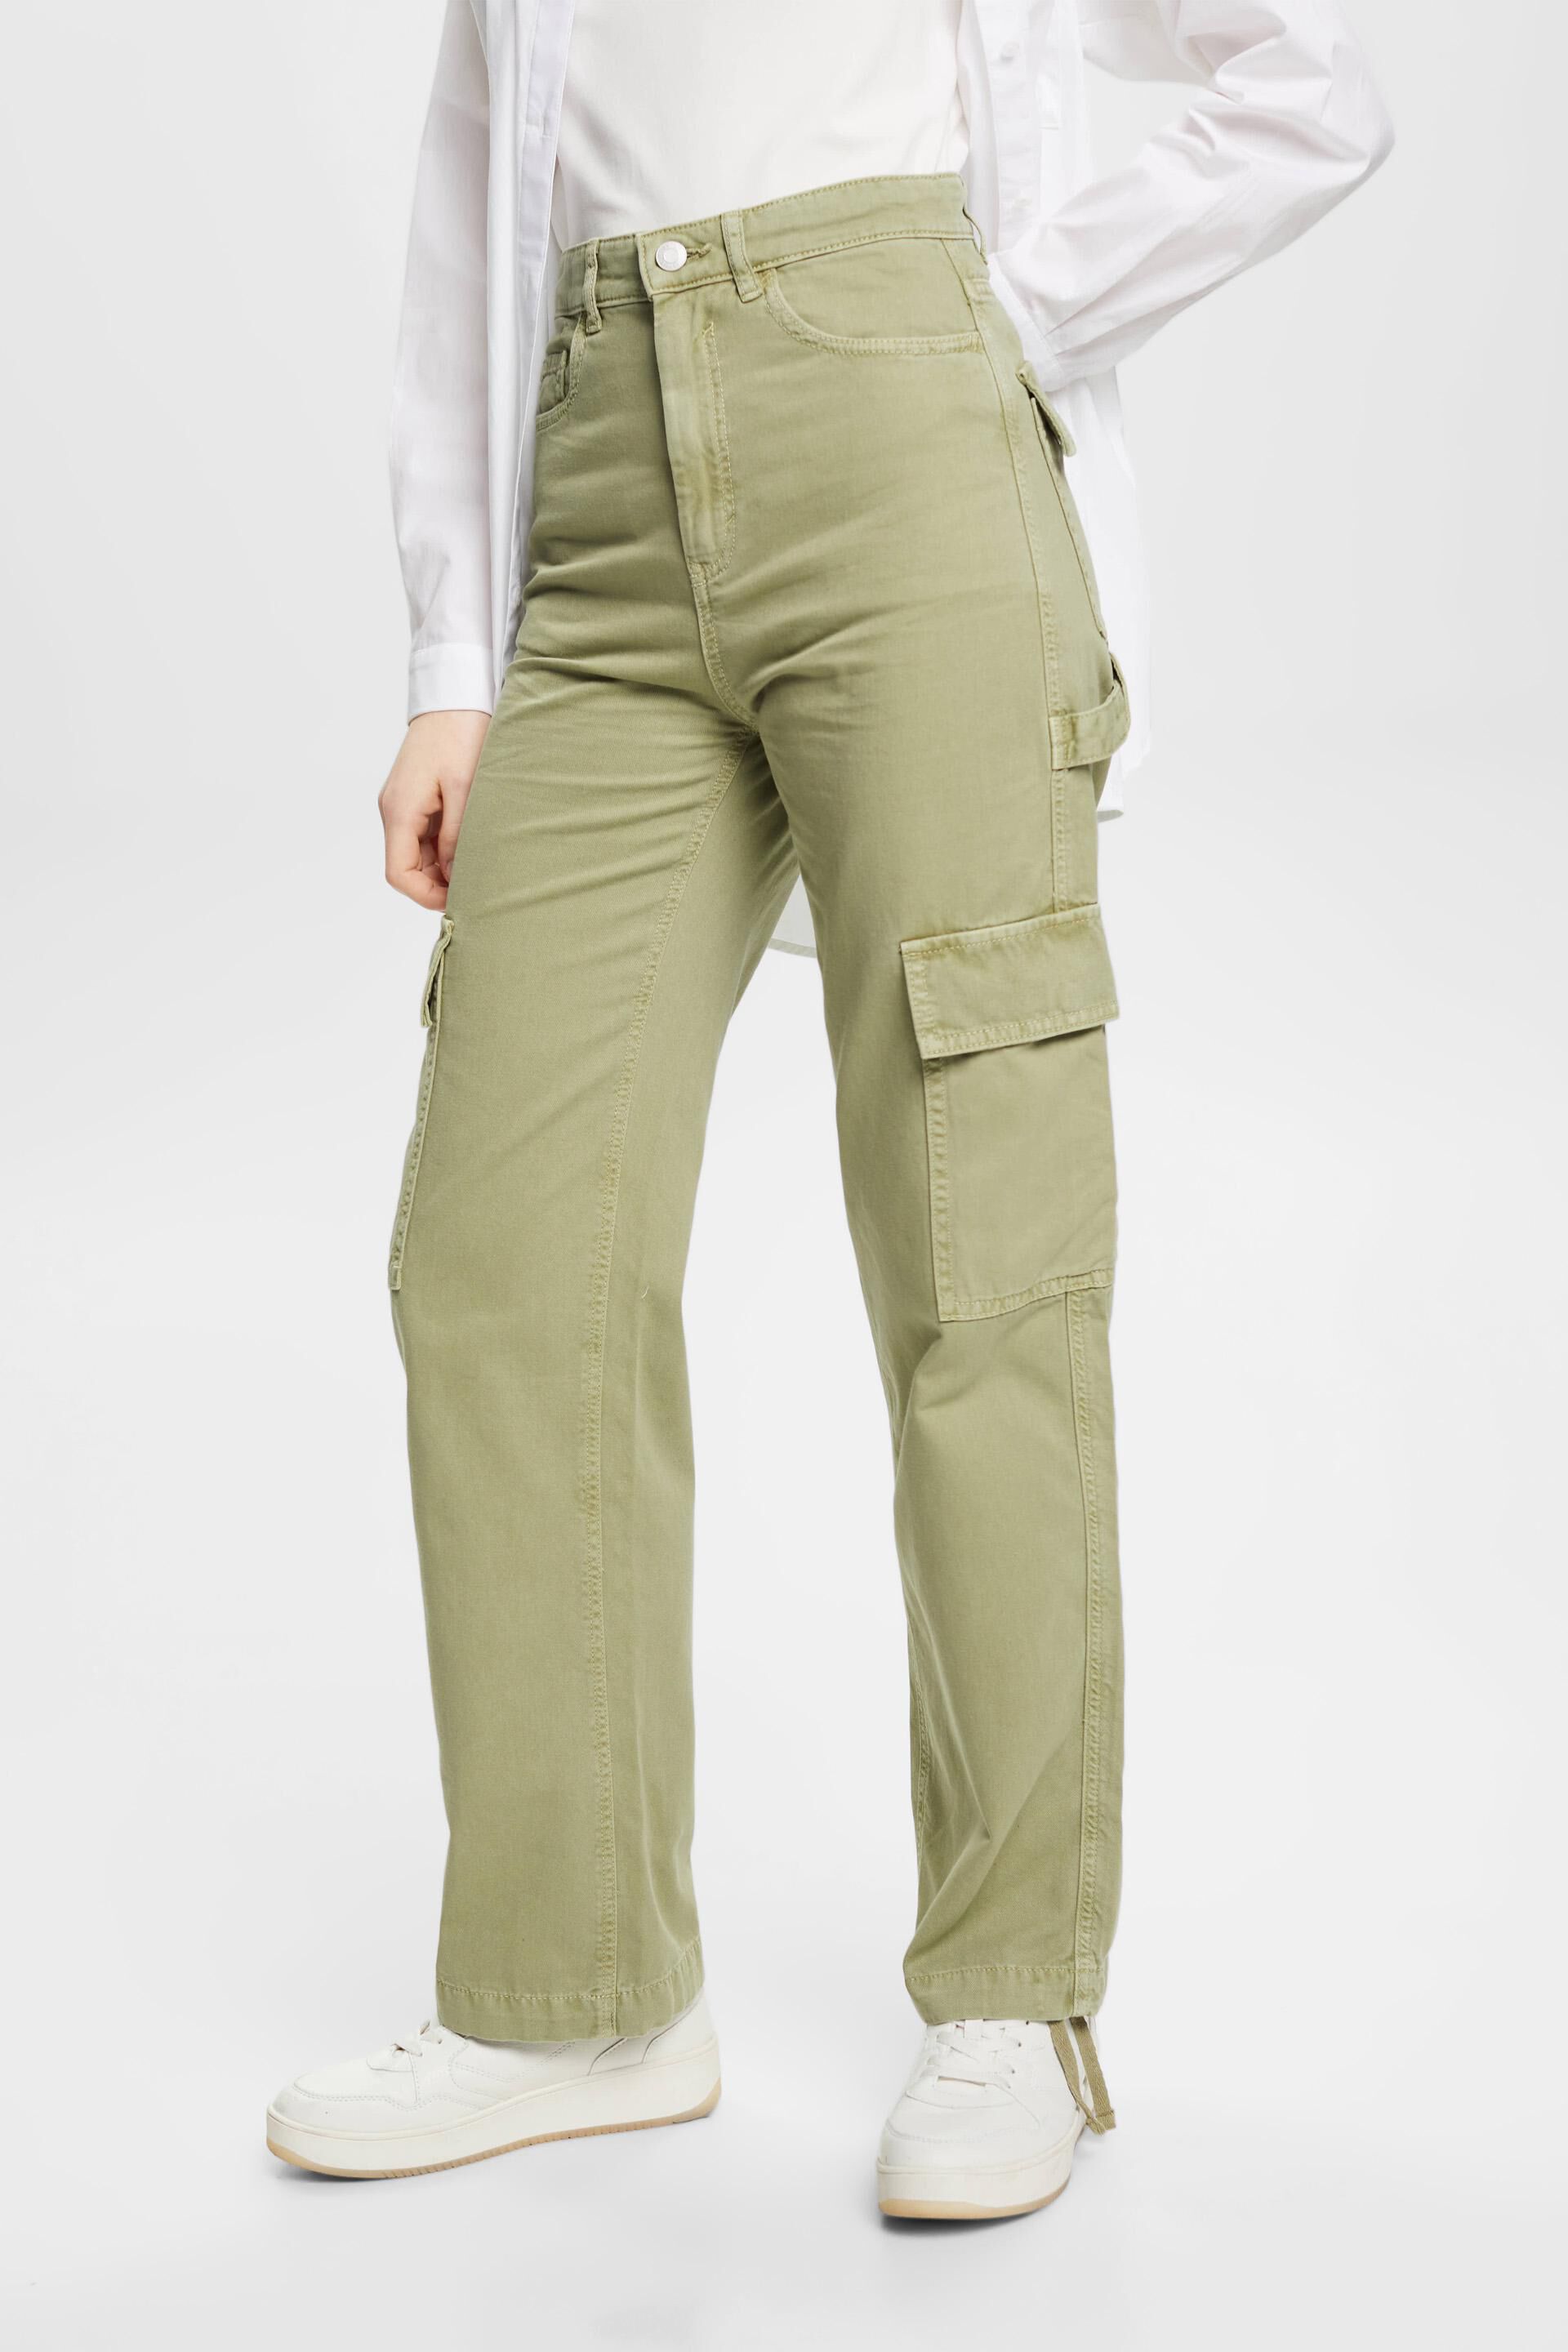 New Look Cotton Cuffed Cargo Trousers - Stone | very.co.uk